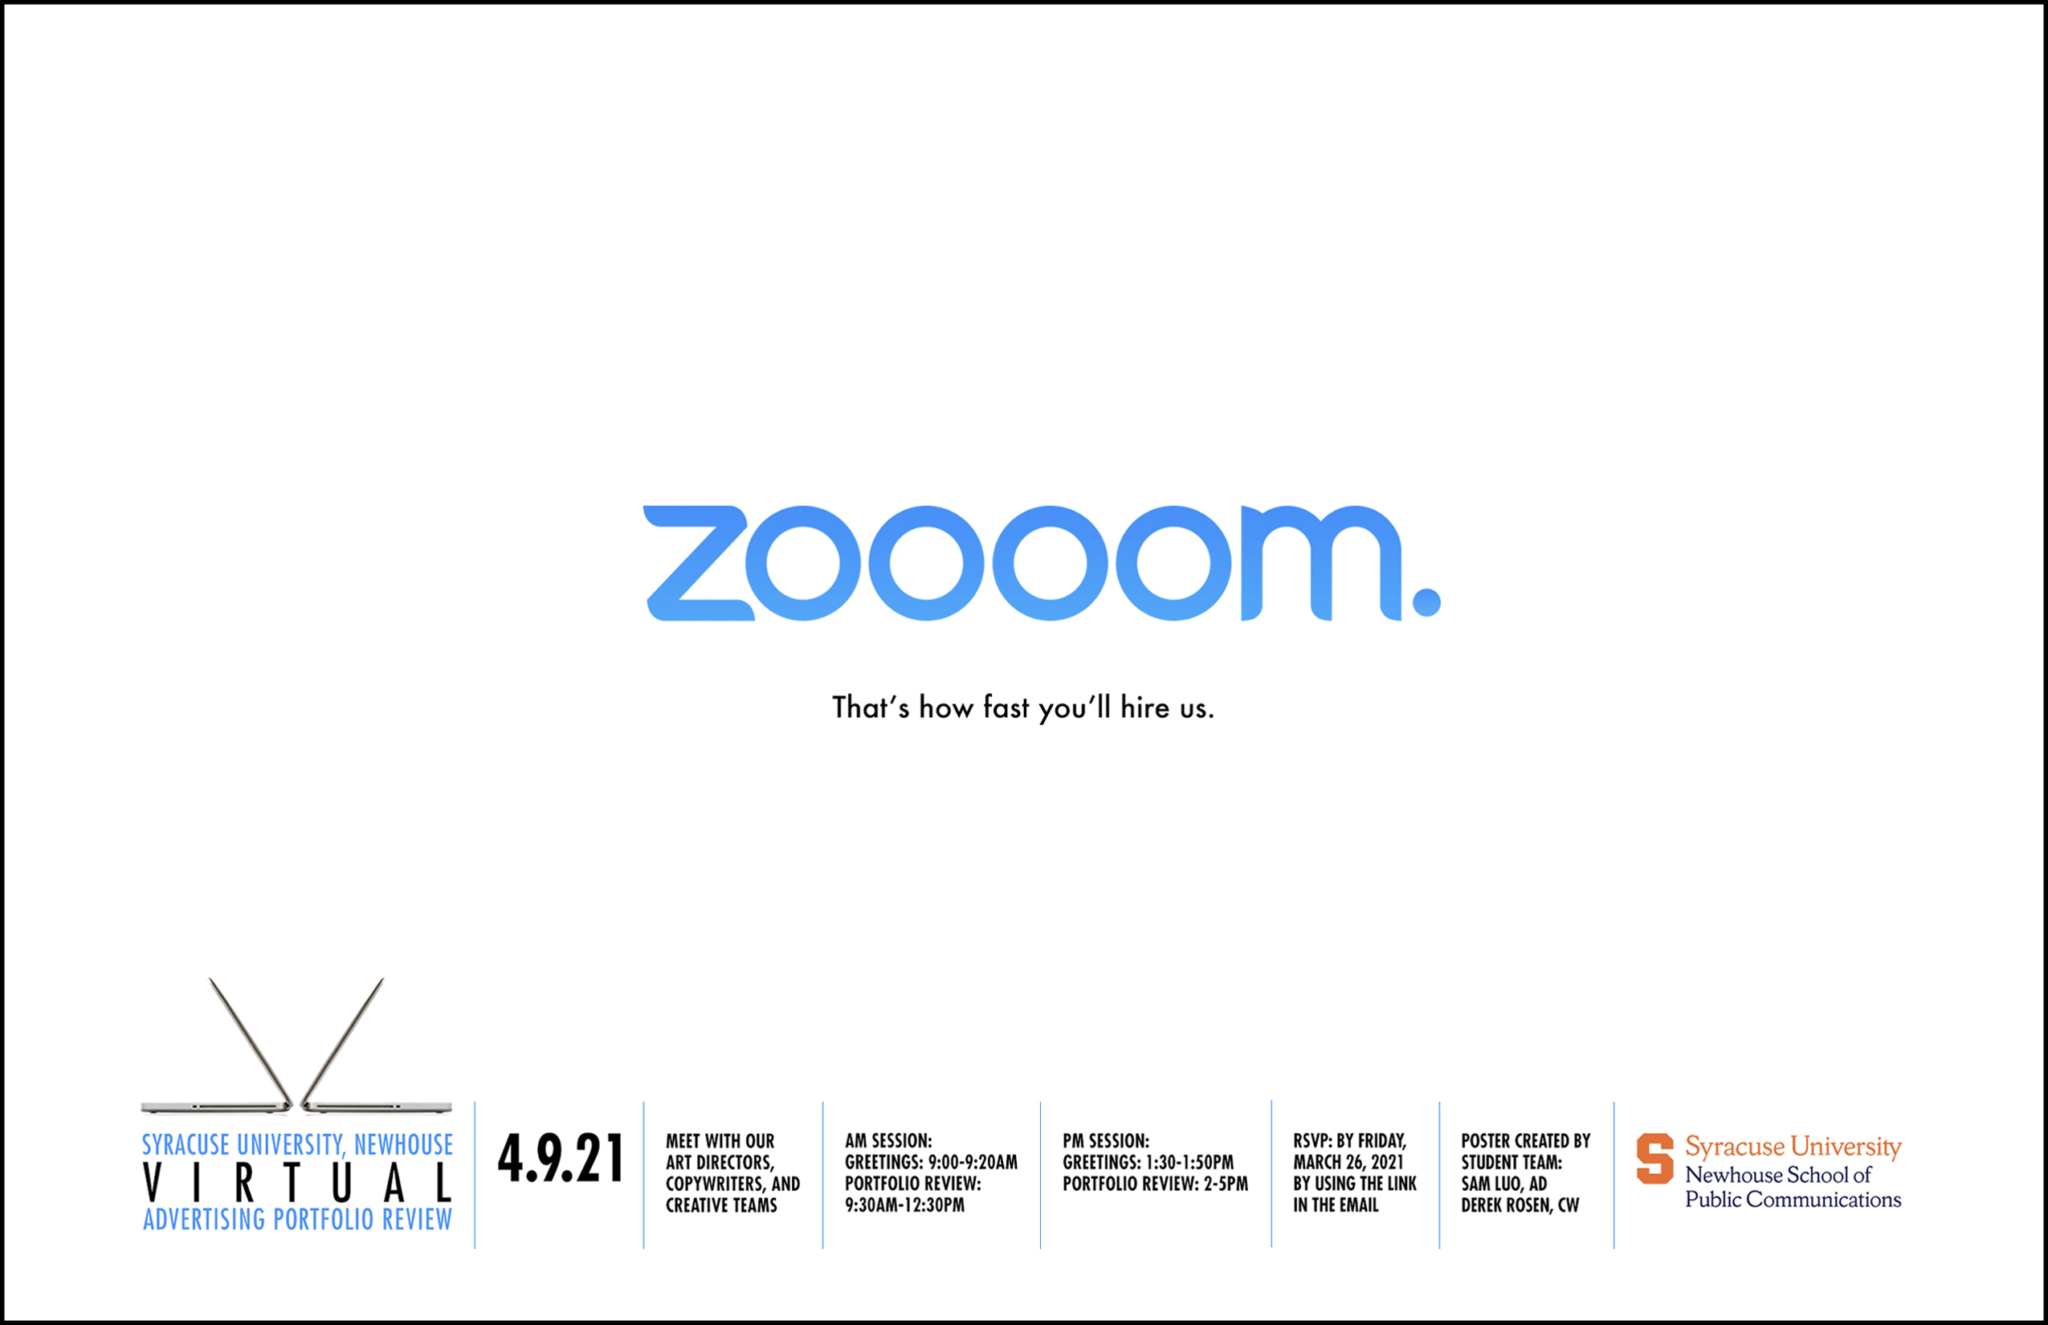 Blue text on a white background with the word "zoom" spelled with four o's with the caption "that's how fast you'll hire us." On the bottom fifth of the image are details about the time and date of the event, which was April 9, 2021 from 1:30 to 5 p.m.